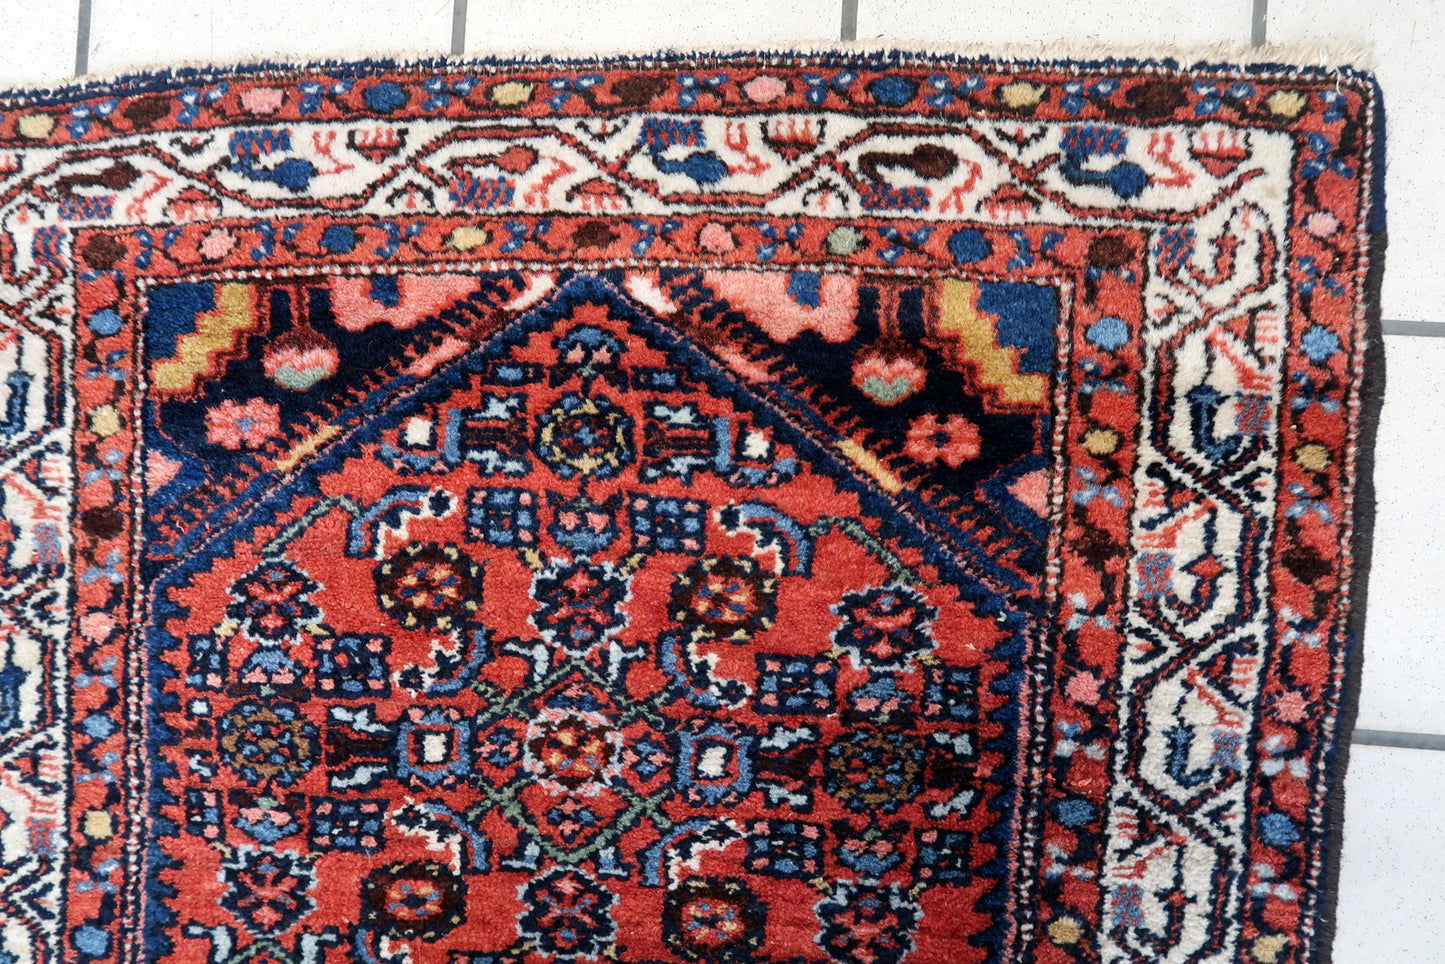 Close-up of the central field of the rug displaying elaborate geometric designs